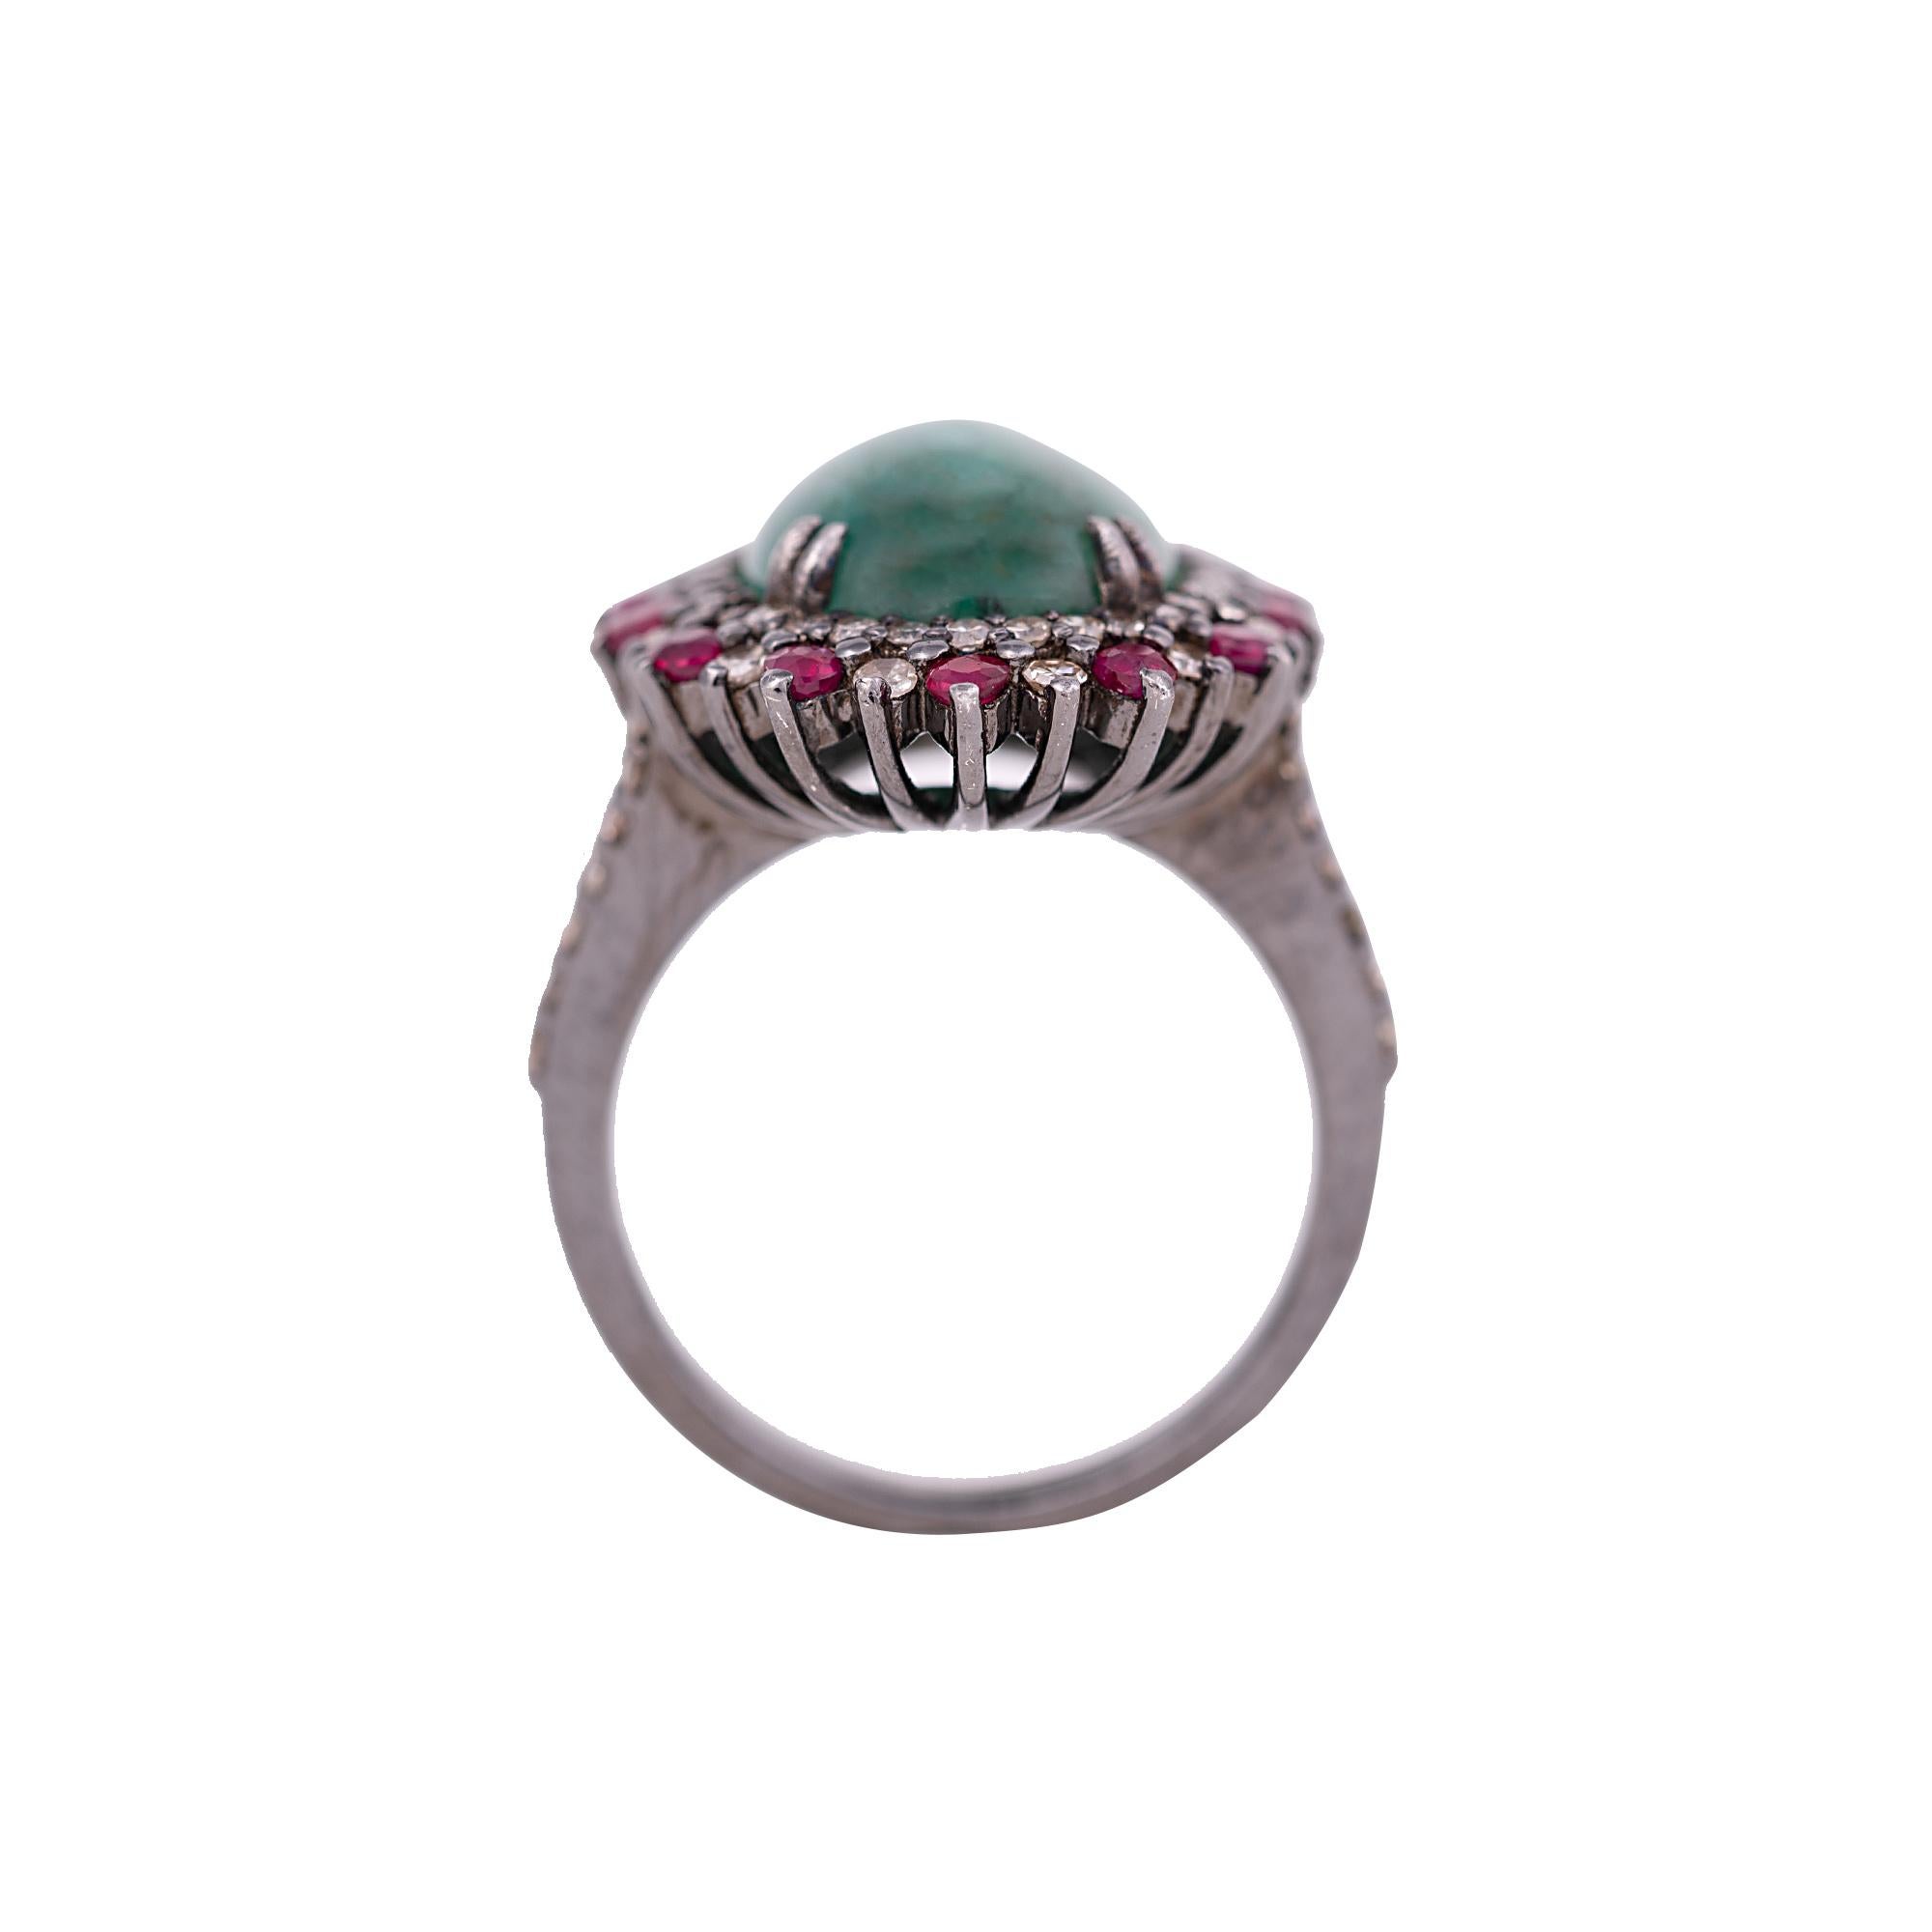 Women's 7.70 Carat Cabochon-Cut Emerald, Diamond, and Ruby Cocktail Ring in Art-Deco For Sale